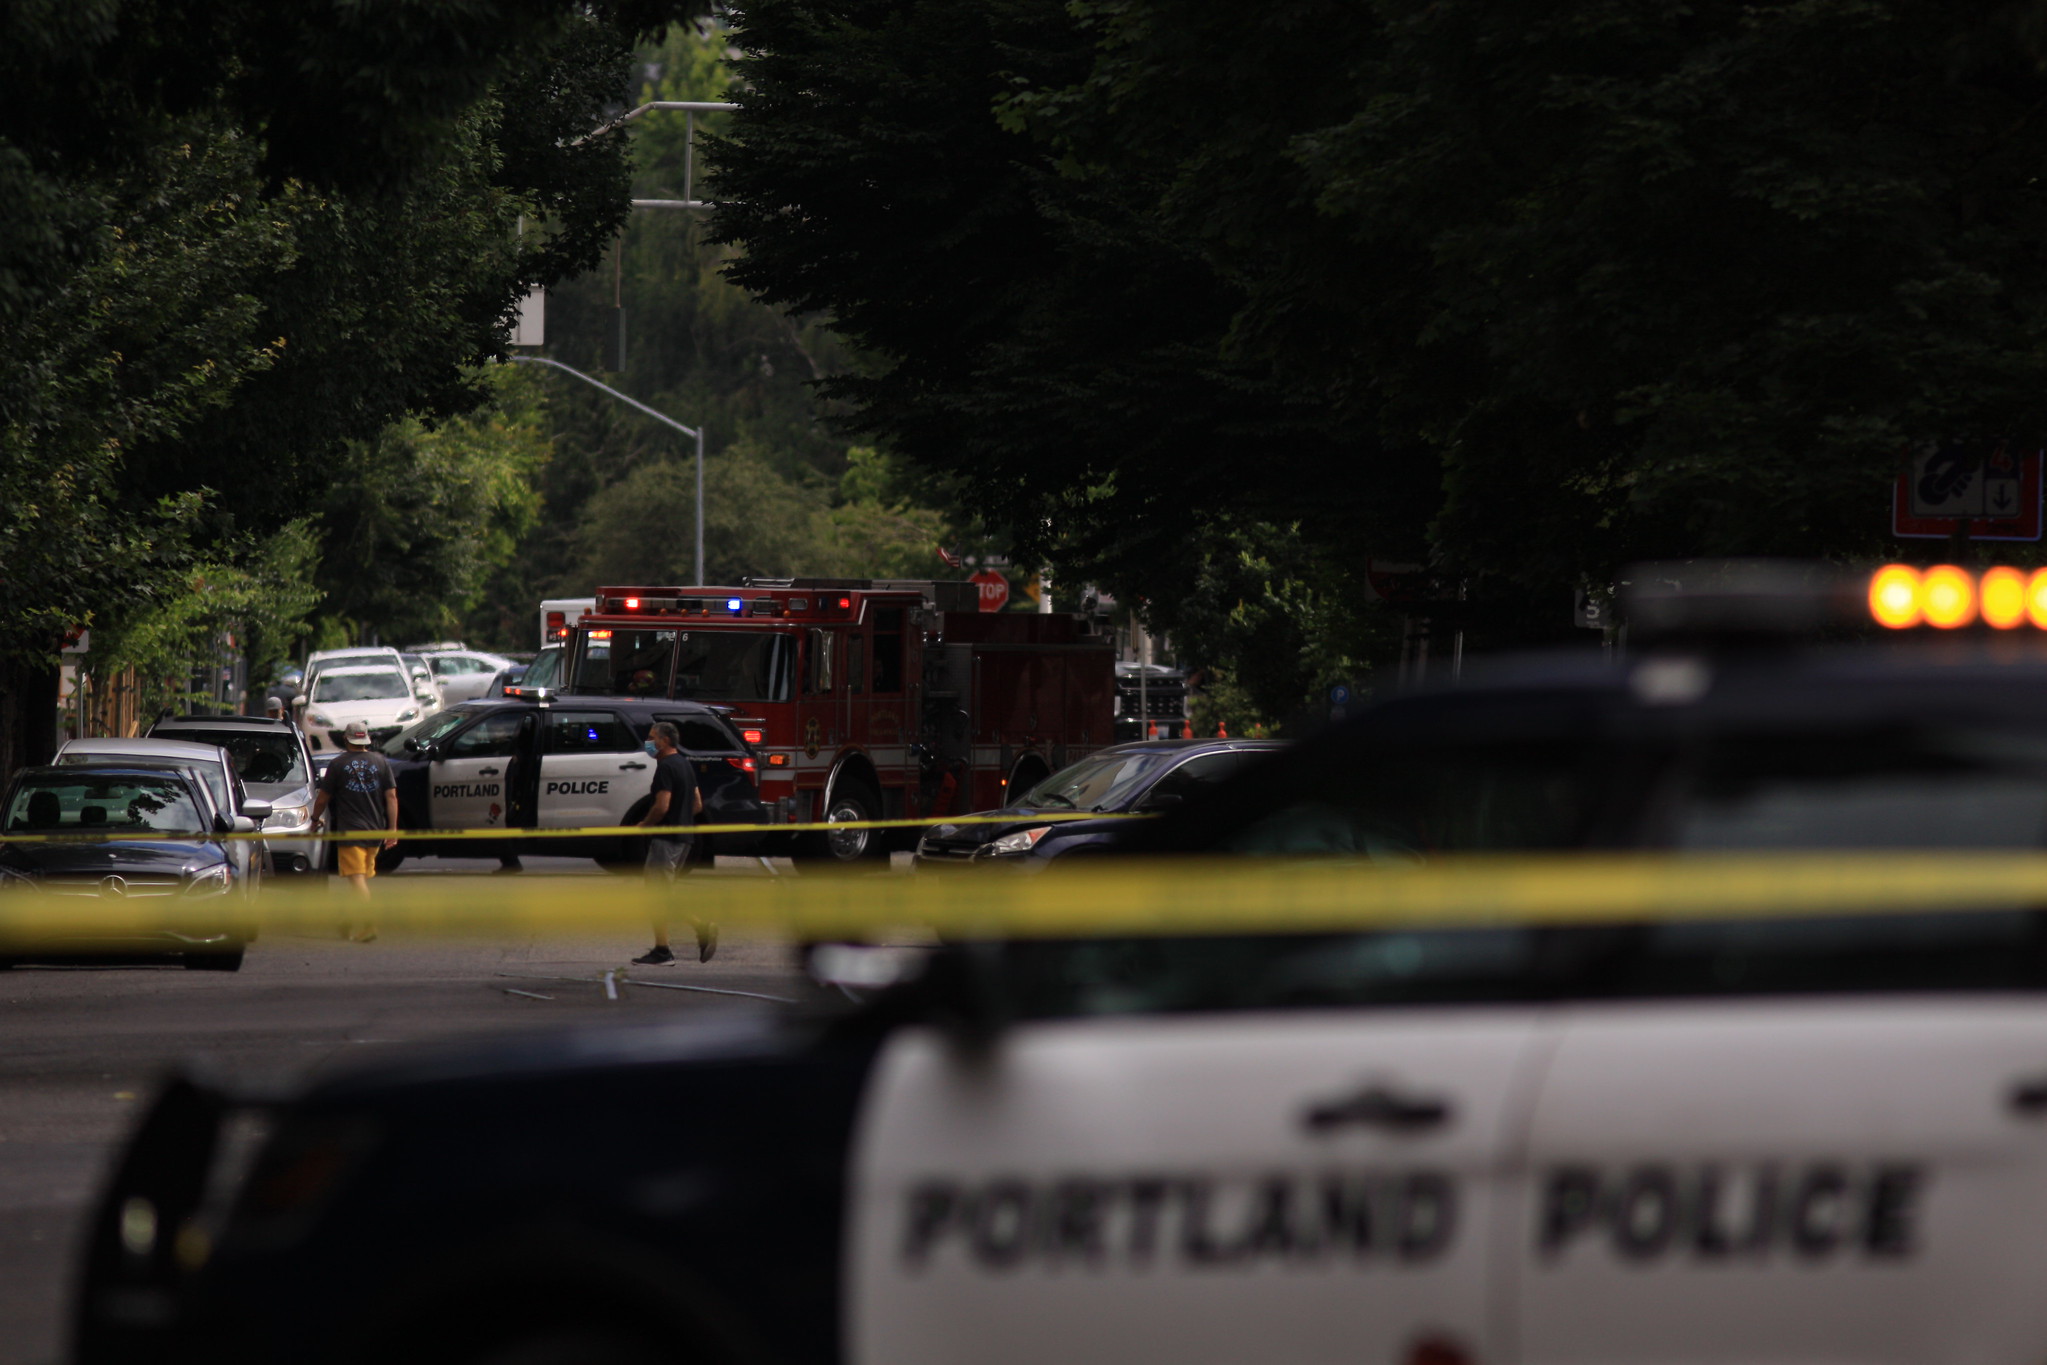 No Rise in Portland 911 Calls After Oregon's Measure 110, New Data Show